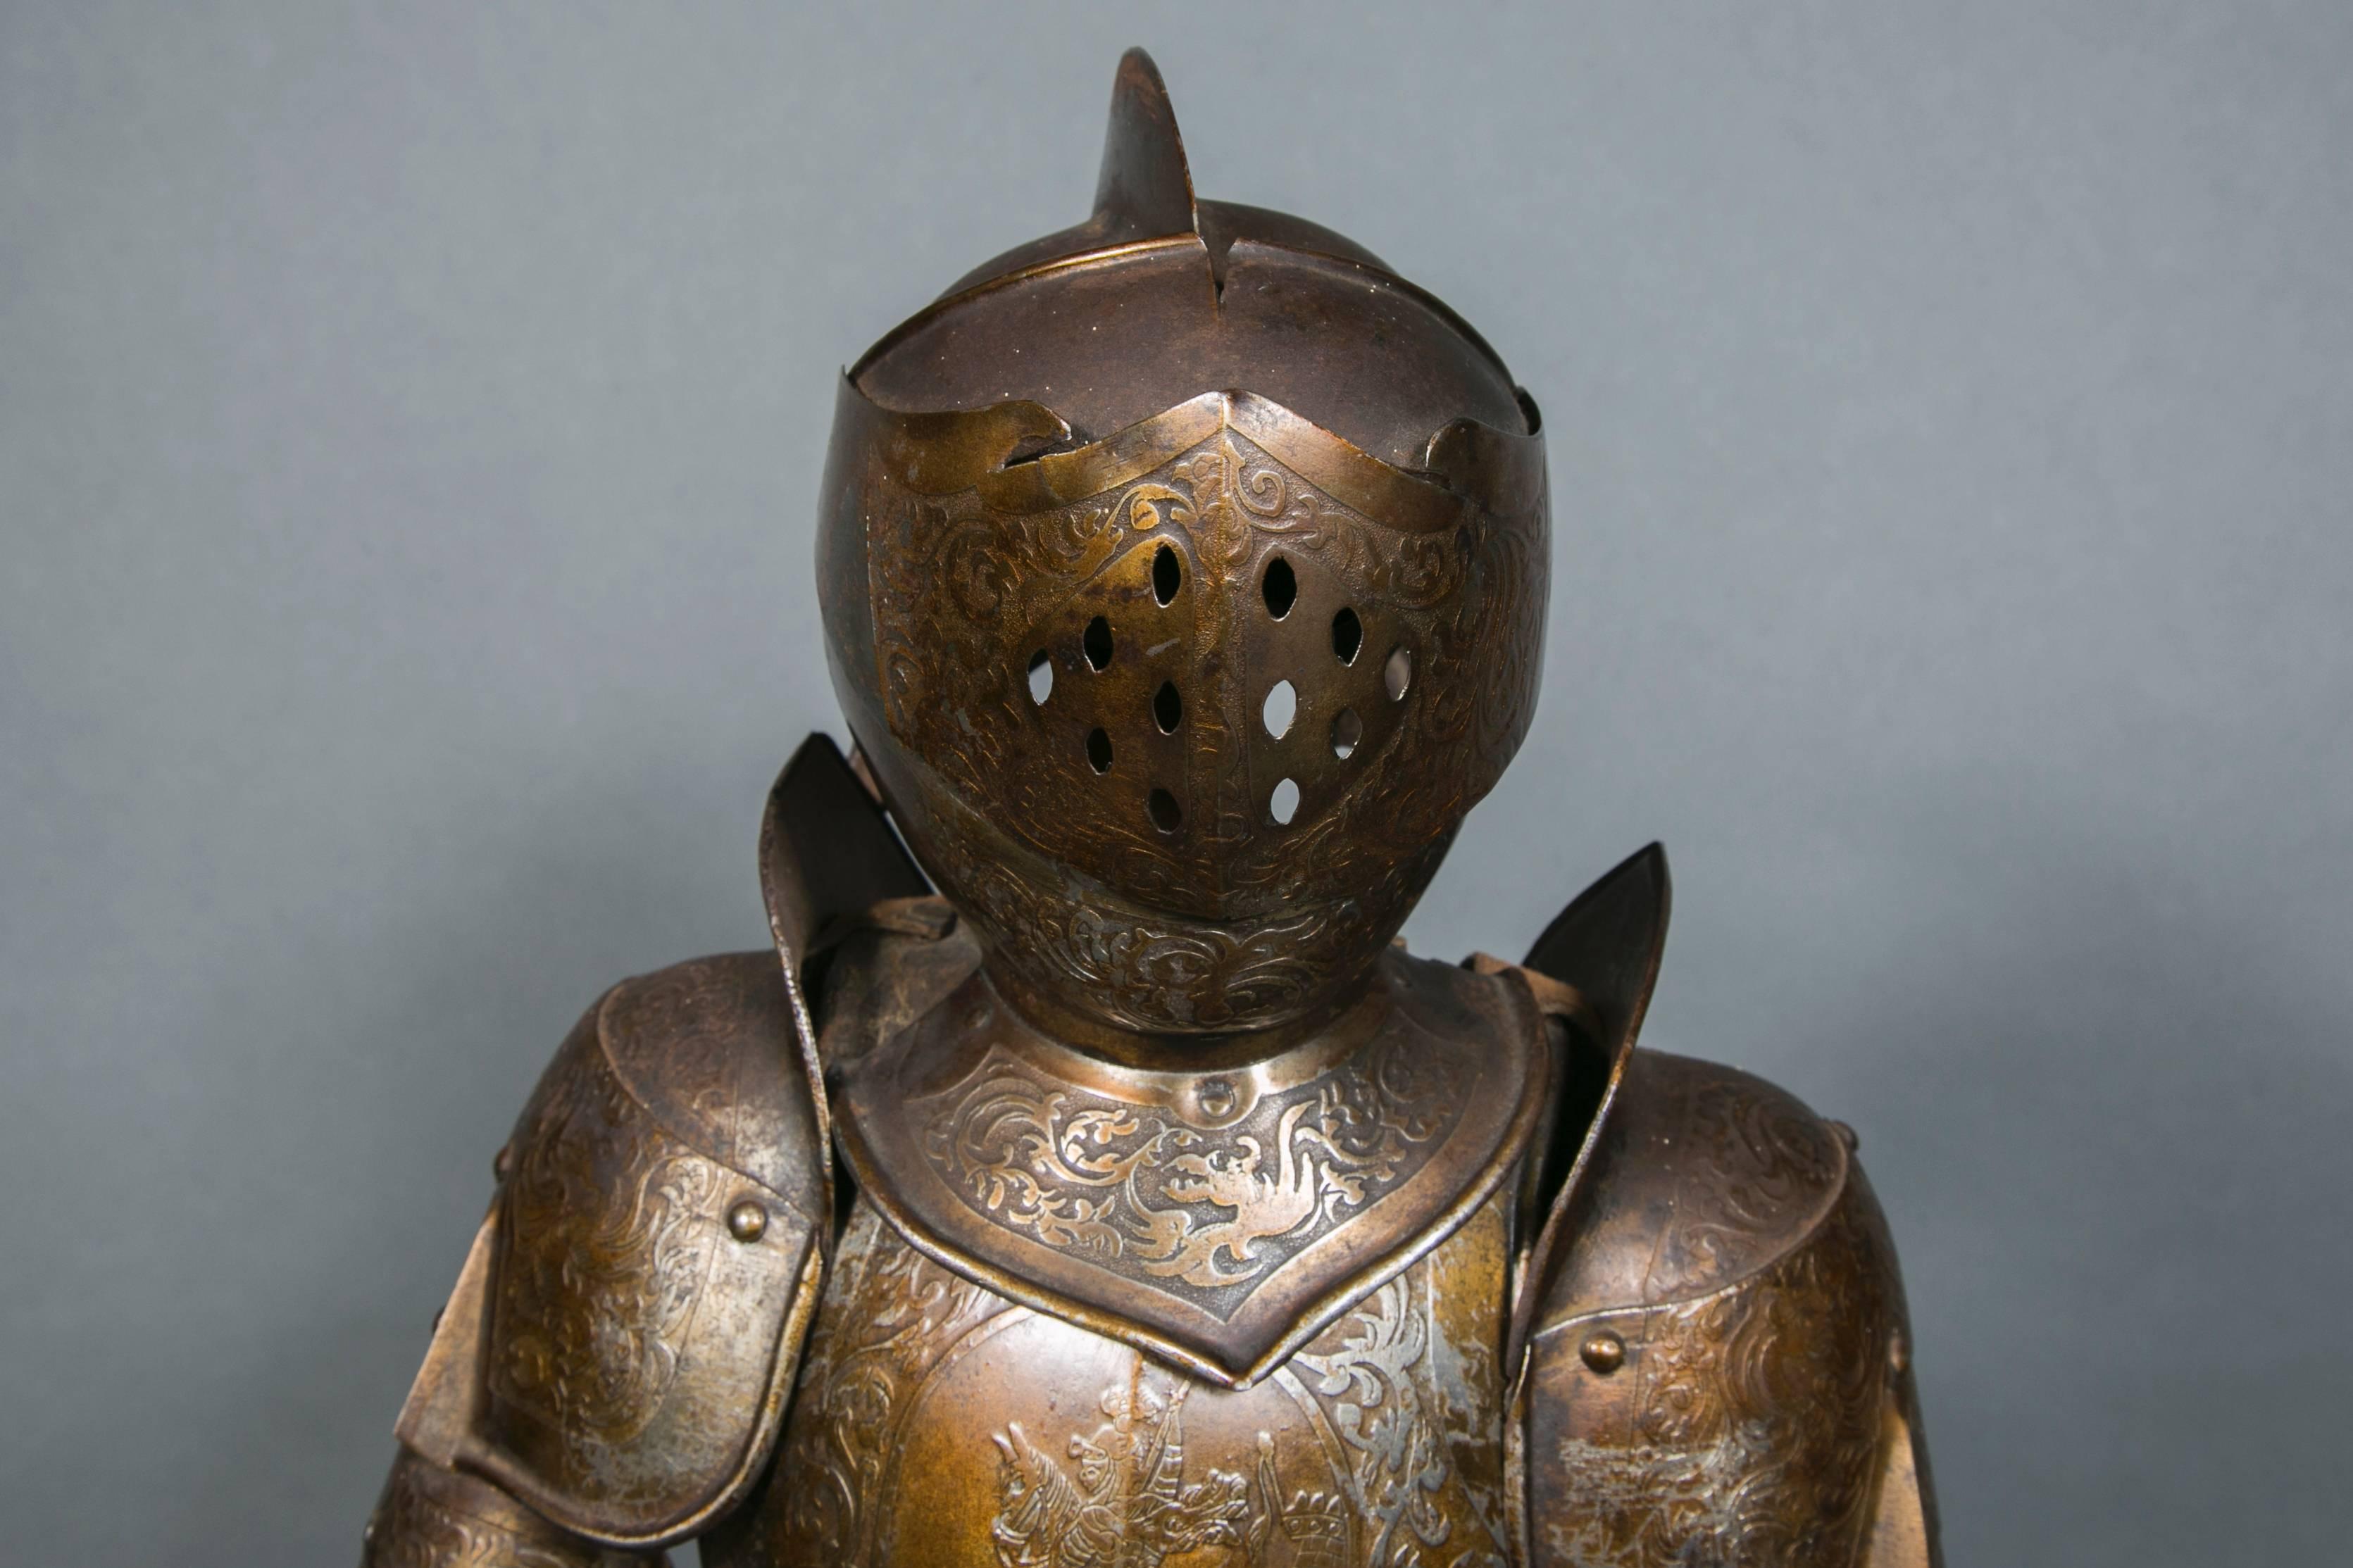 Miniature Medieval Armor in the Spirit of Viollet Le Duc 1